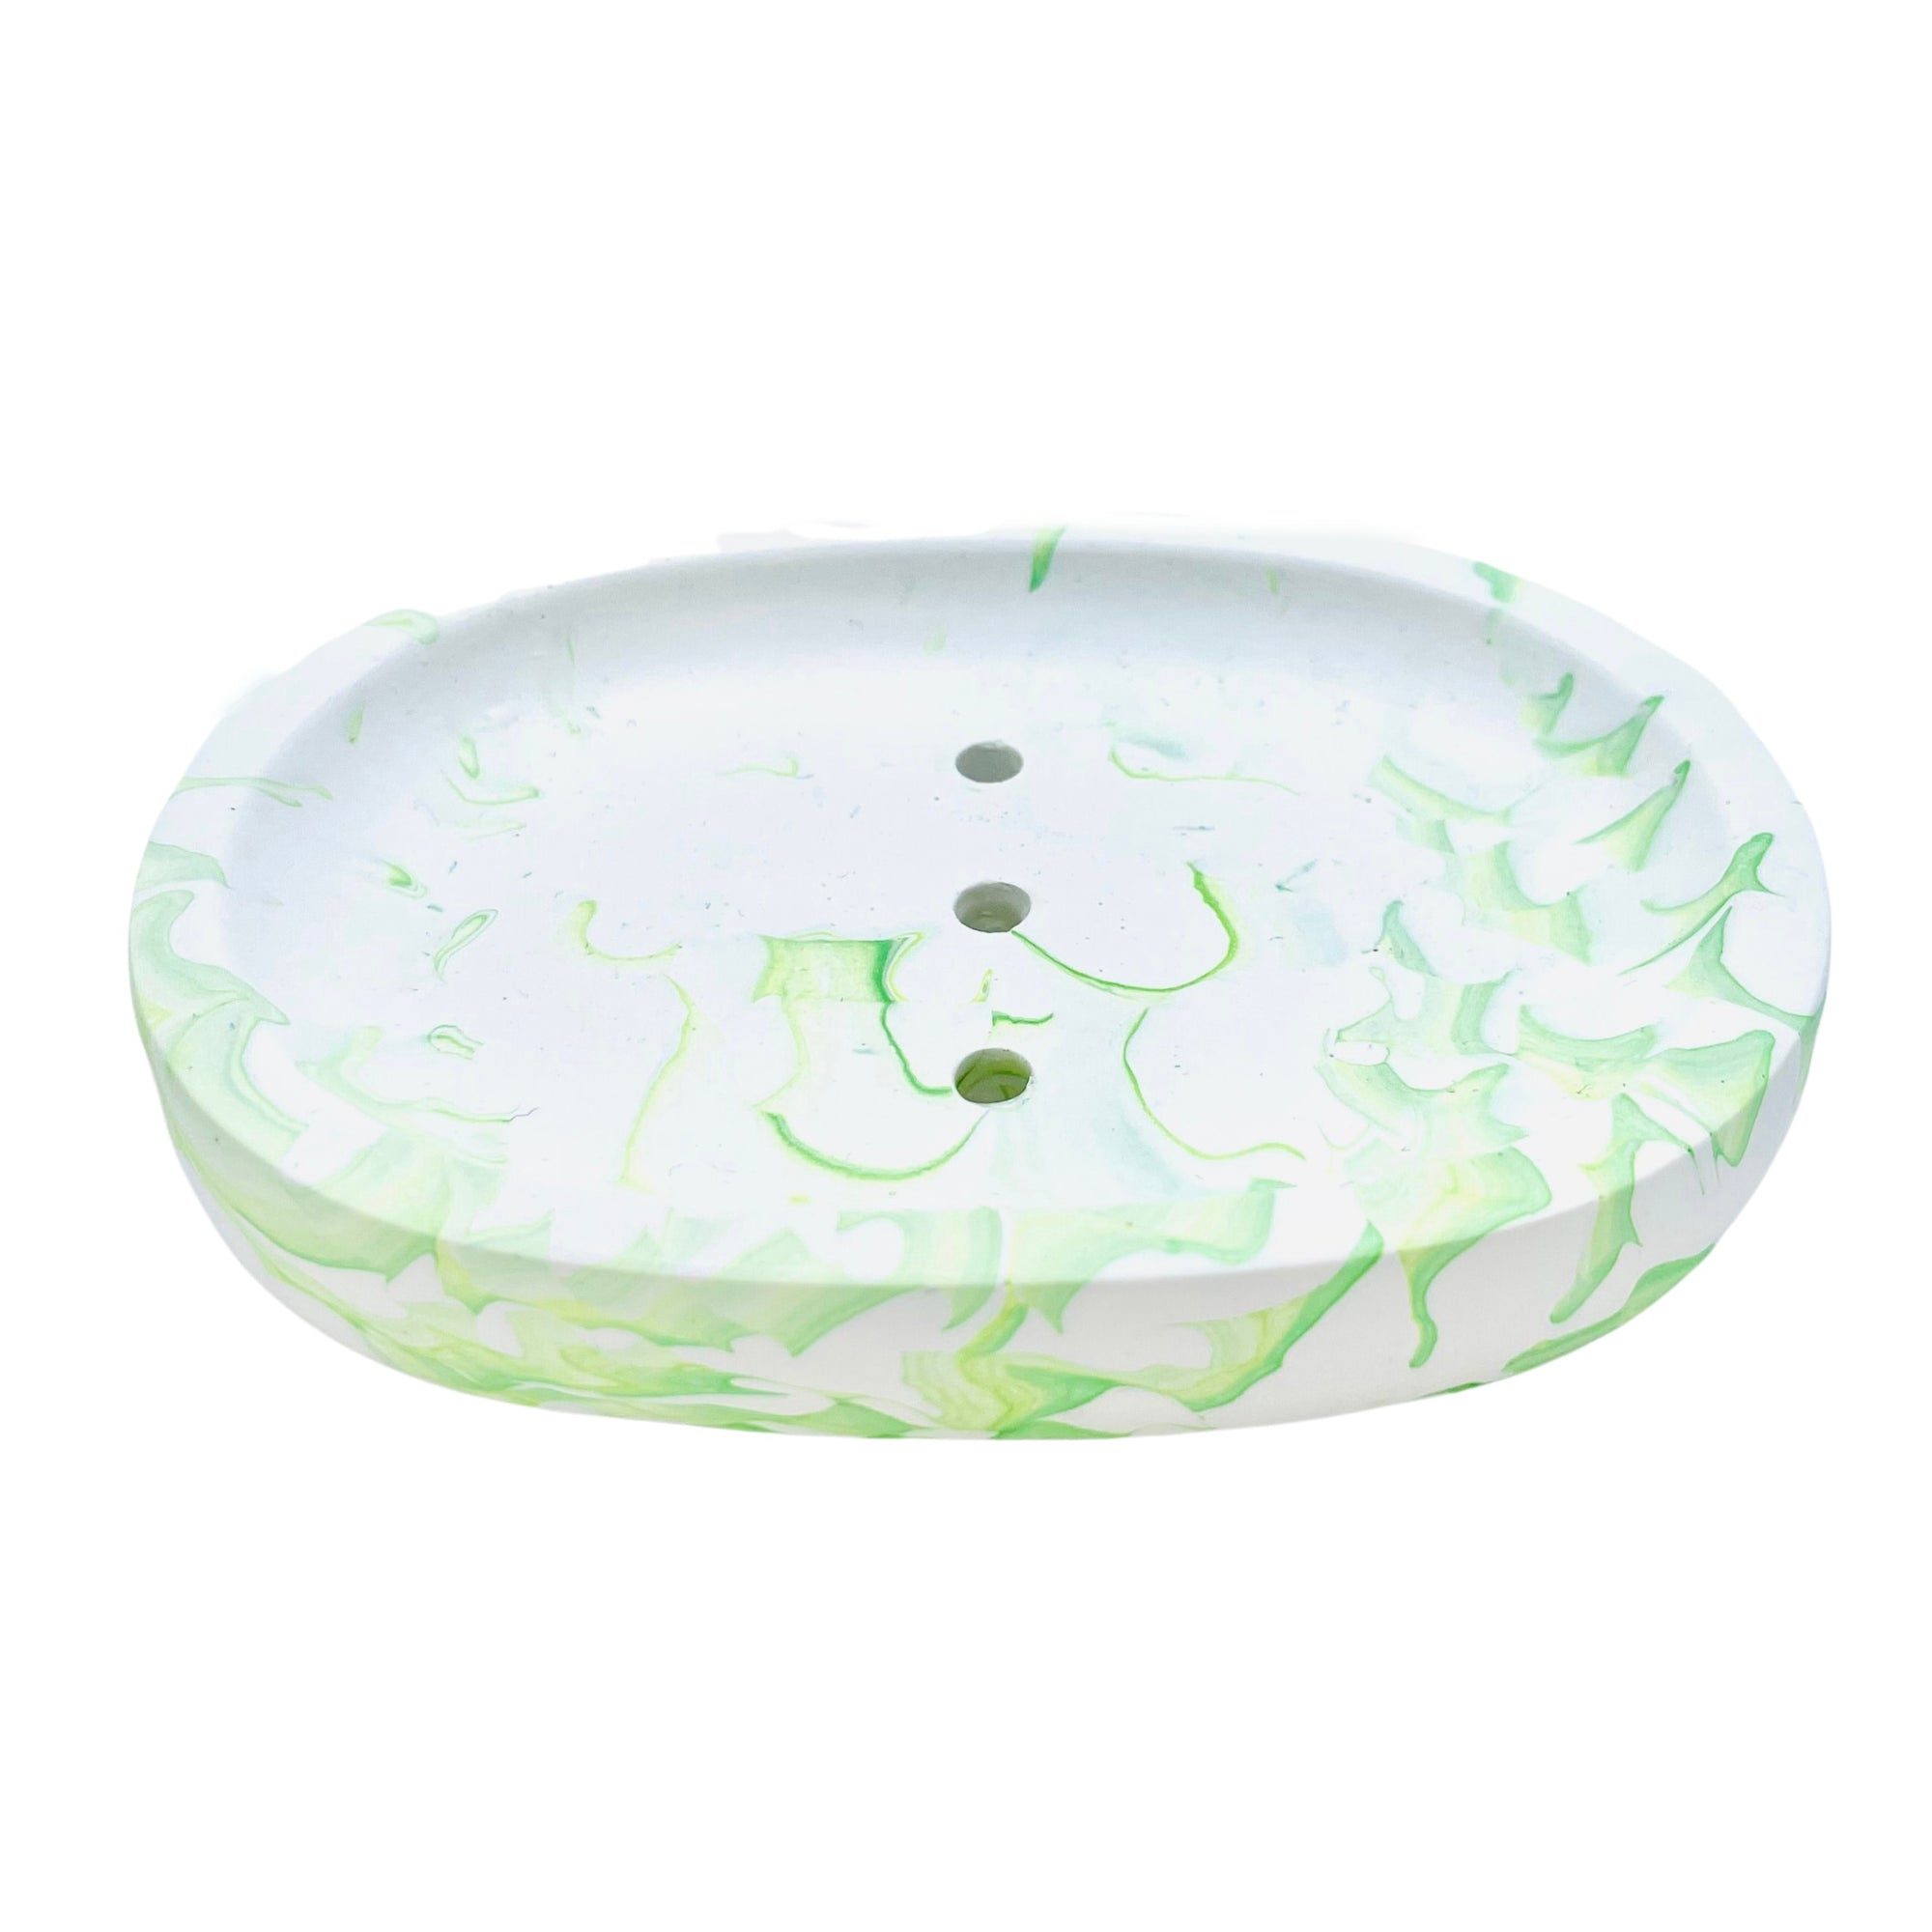 This oval Jesmonite soapdish measures 13.3cm in length and is marbled with lime green pigment.